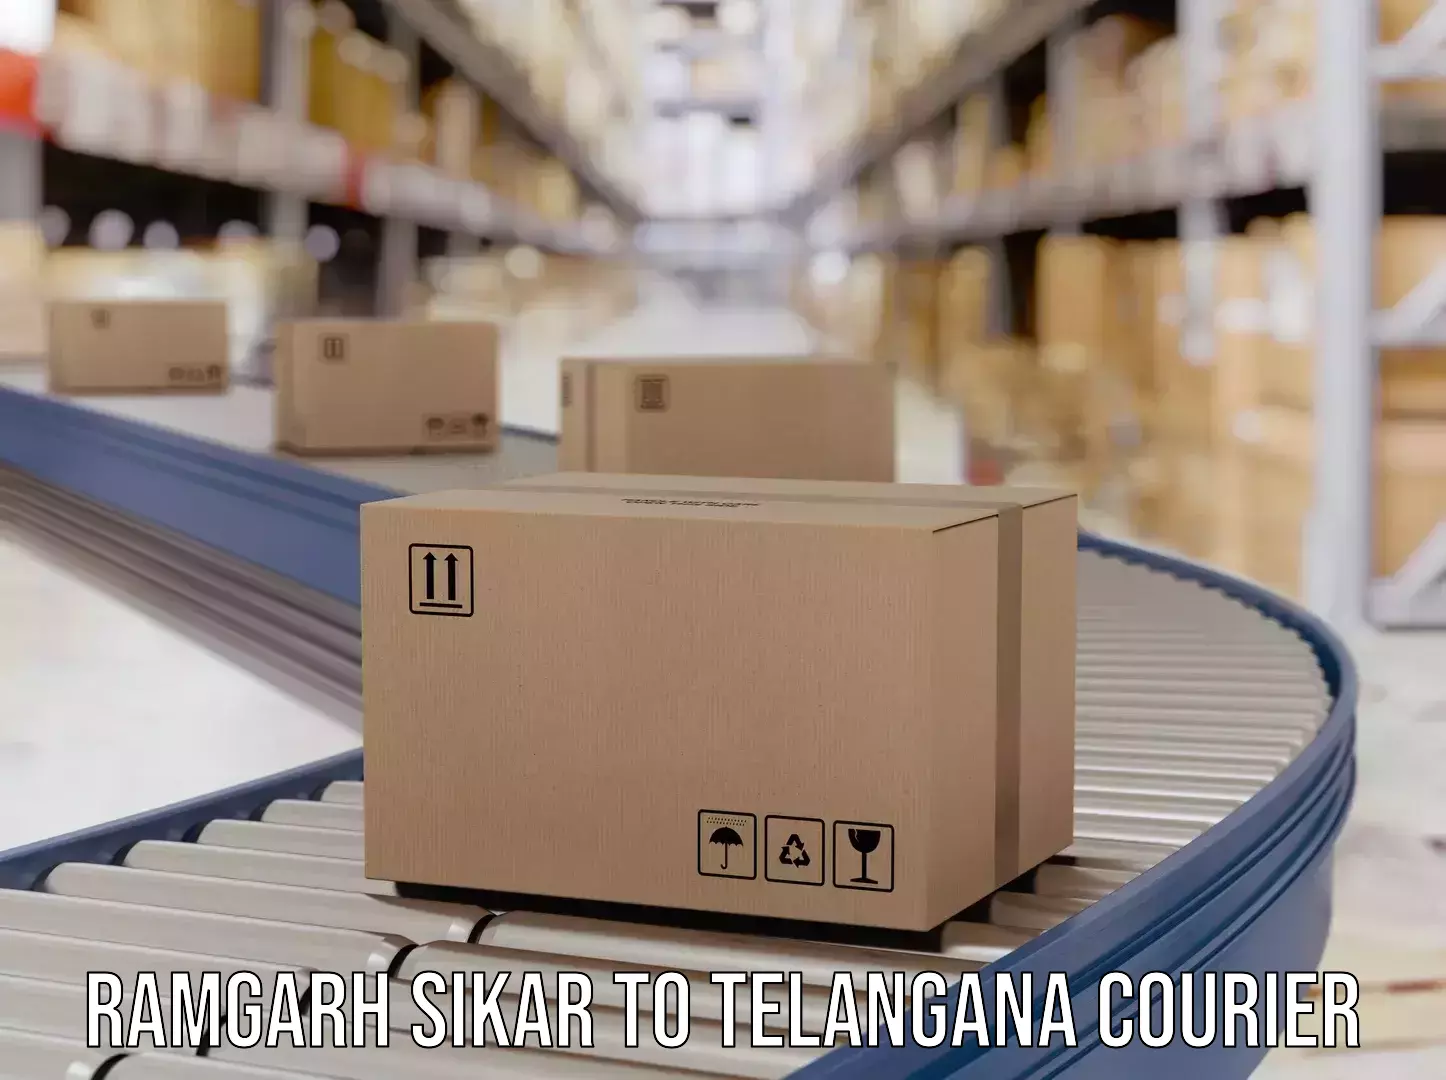 Modern courier technology Ramgarh Sikar to Danthalapally